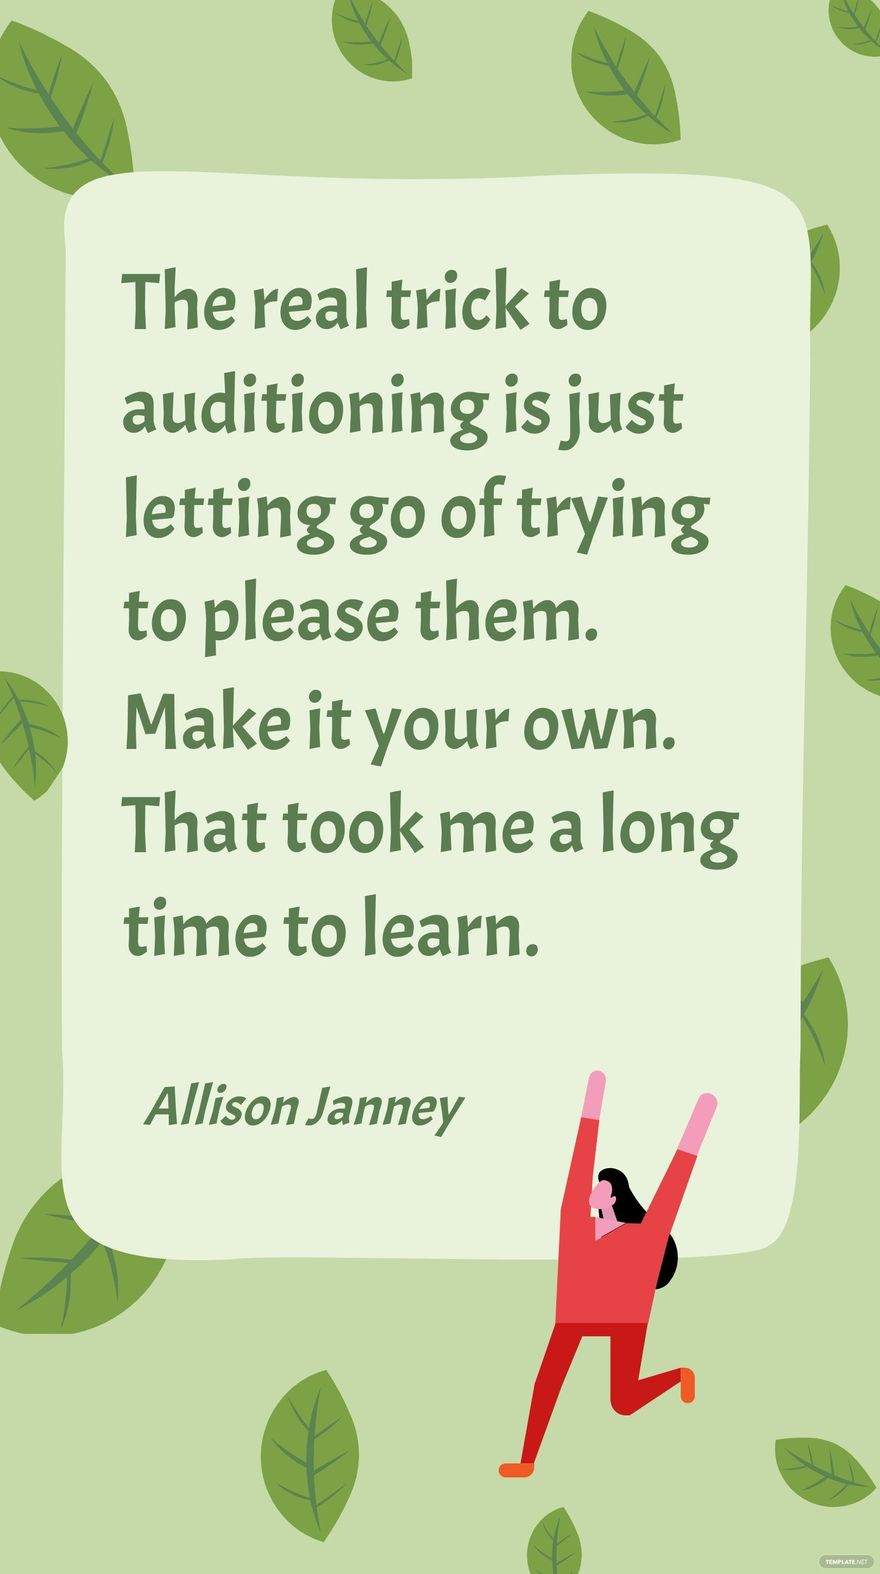 Allison Janney - The real trick to auditioning is just letting go of trying to please them. Make it your own. That took me a long time to learn.